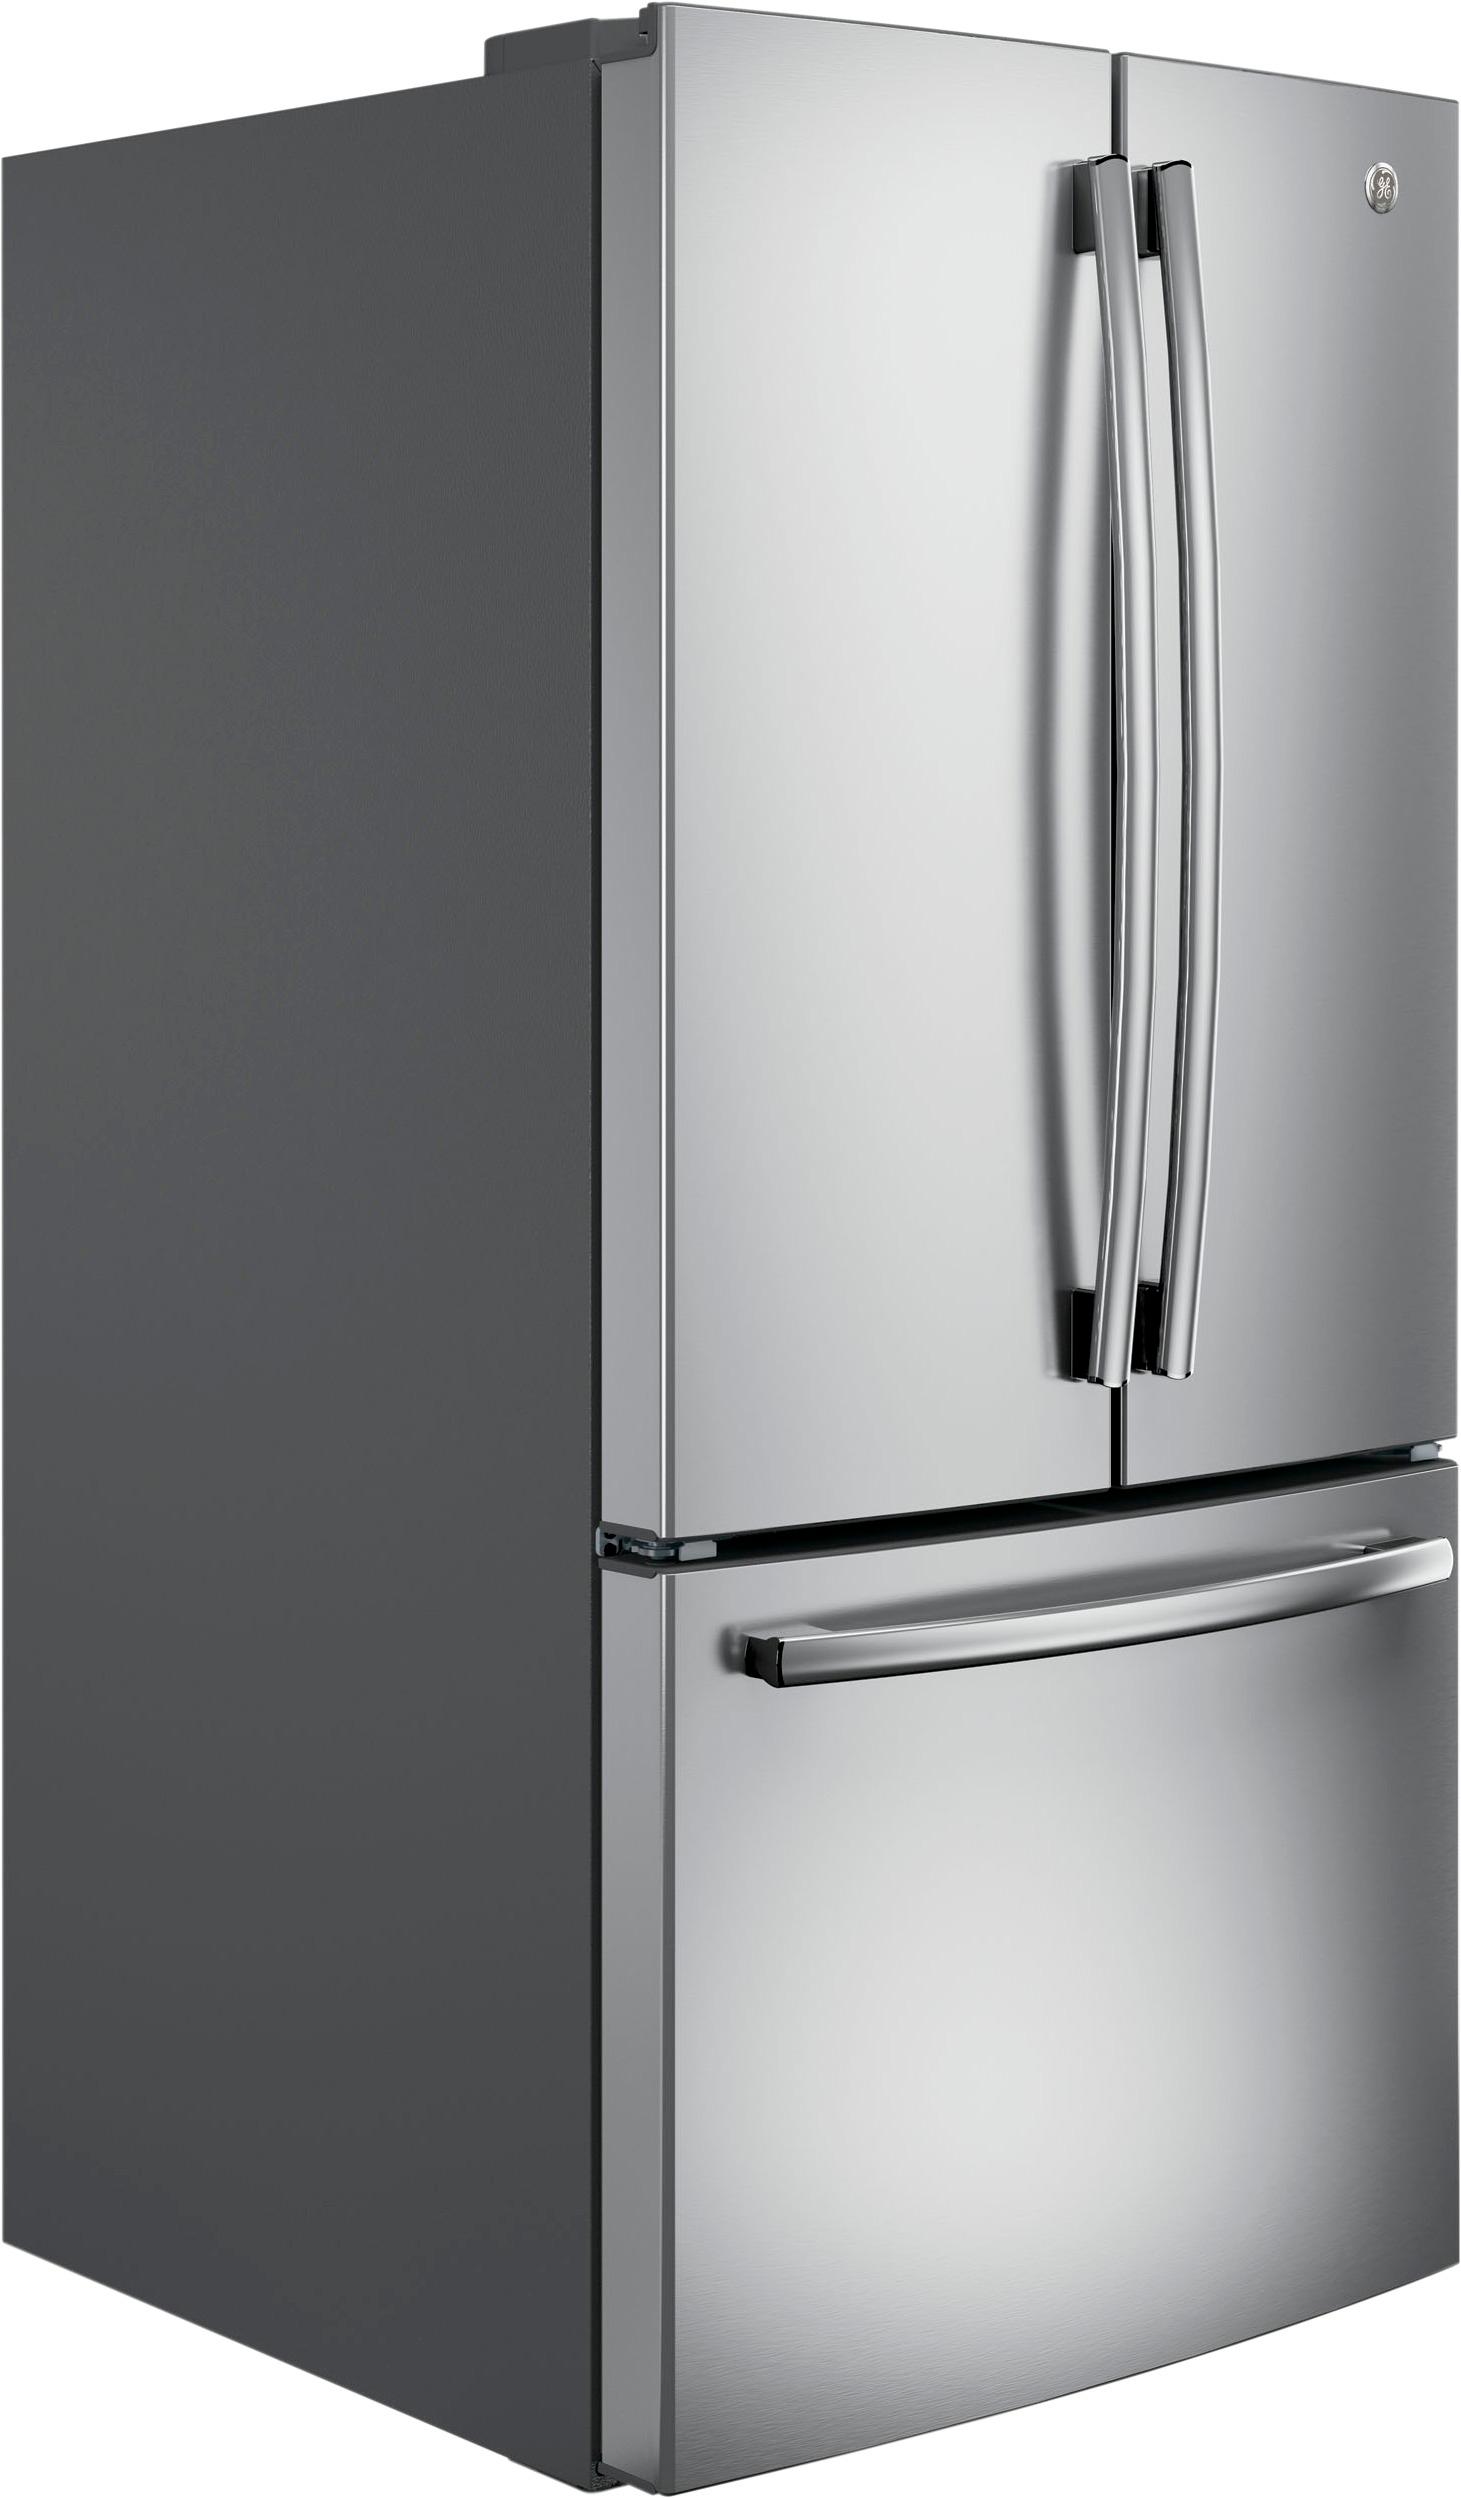 Angle View: GE - 27.7 Cu. Ft. French Door Refrigerator - Black slate